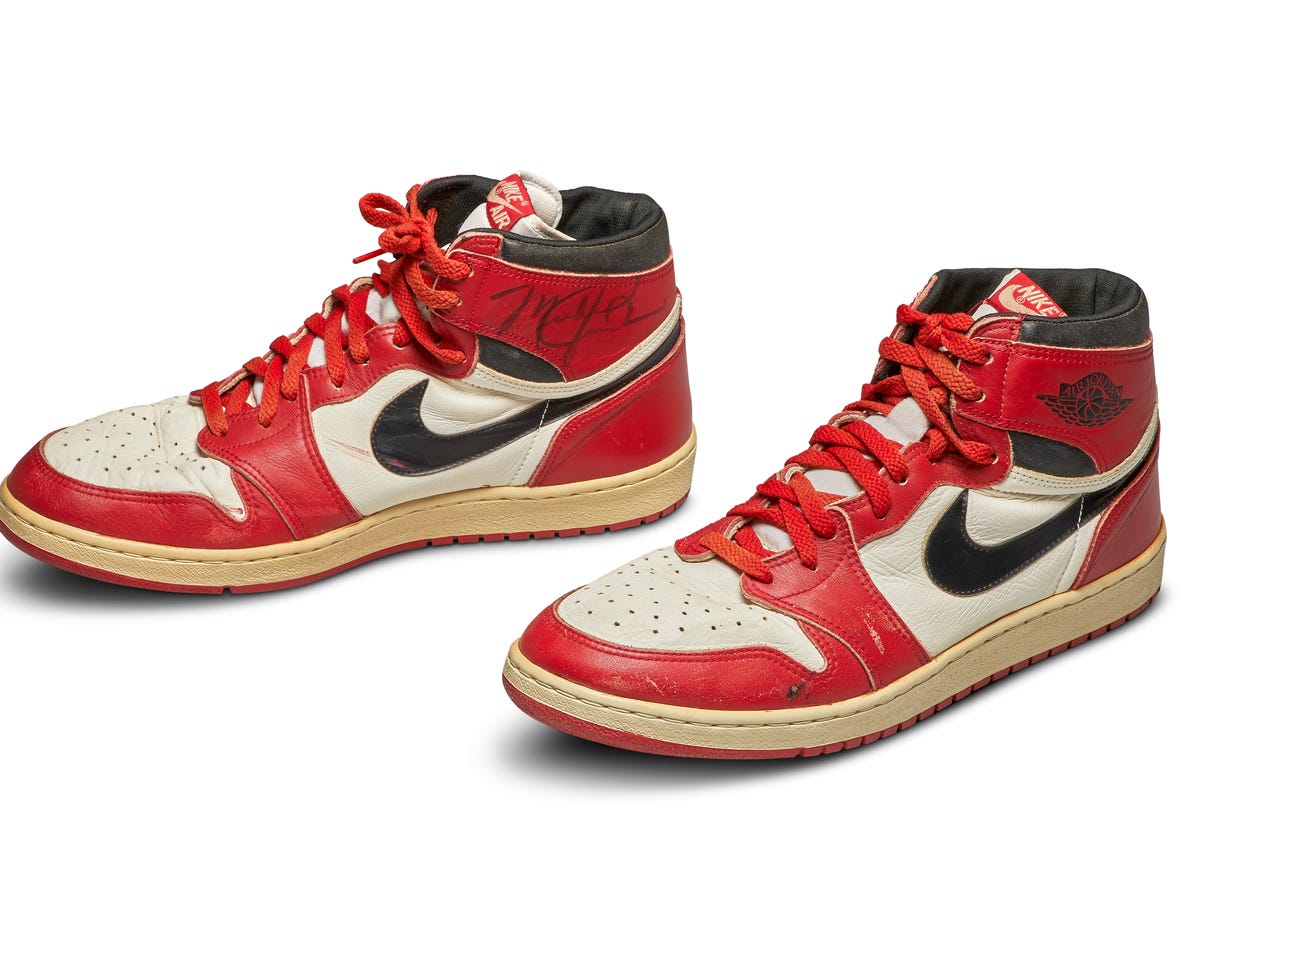 Michael Jordan S Signature Air Jordan Shoes From 1985 Are Going Up For Auction Esquire Middle East